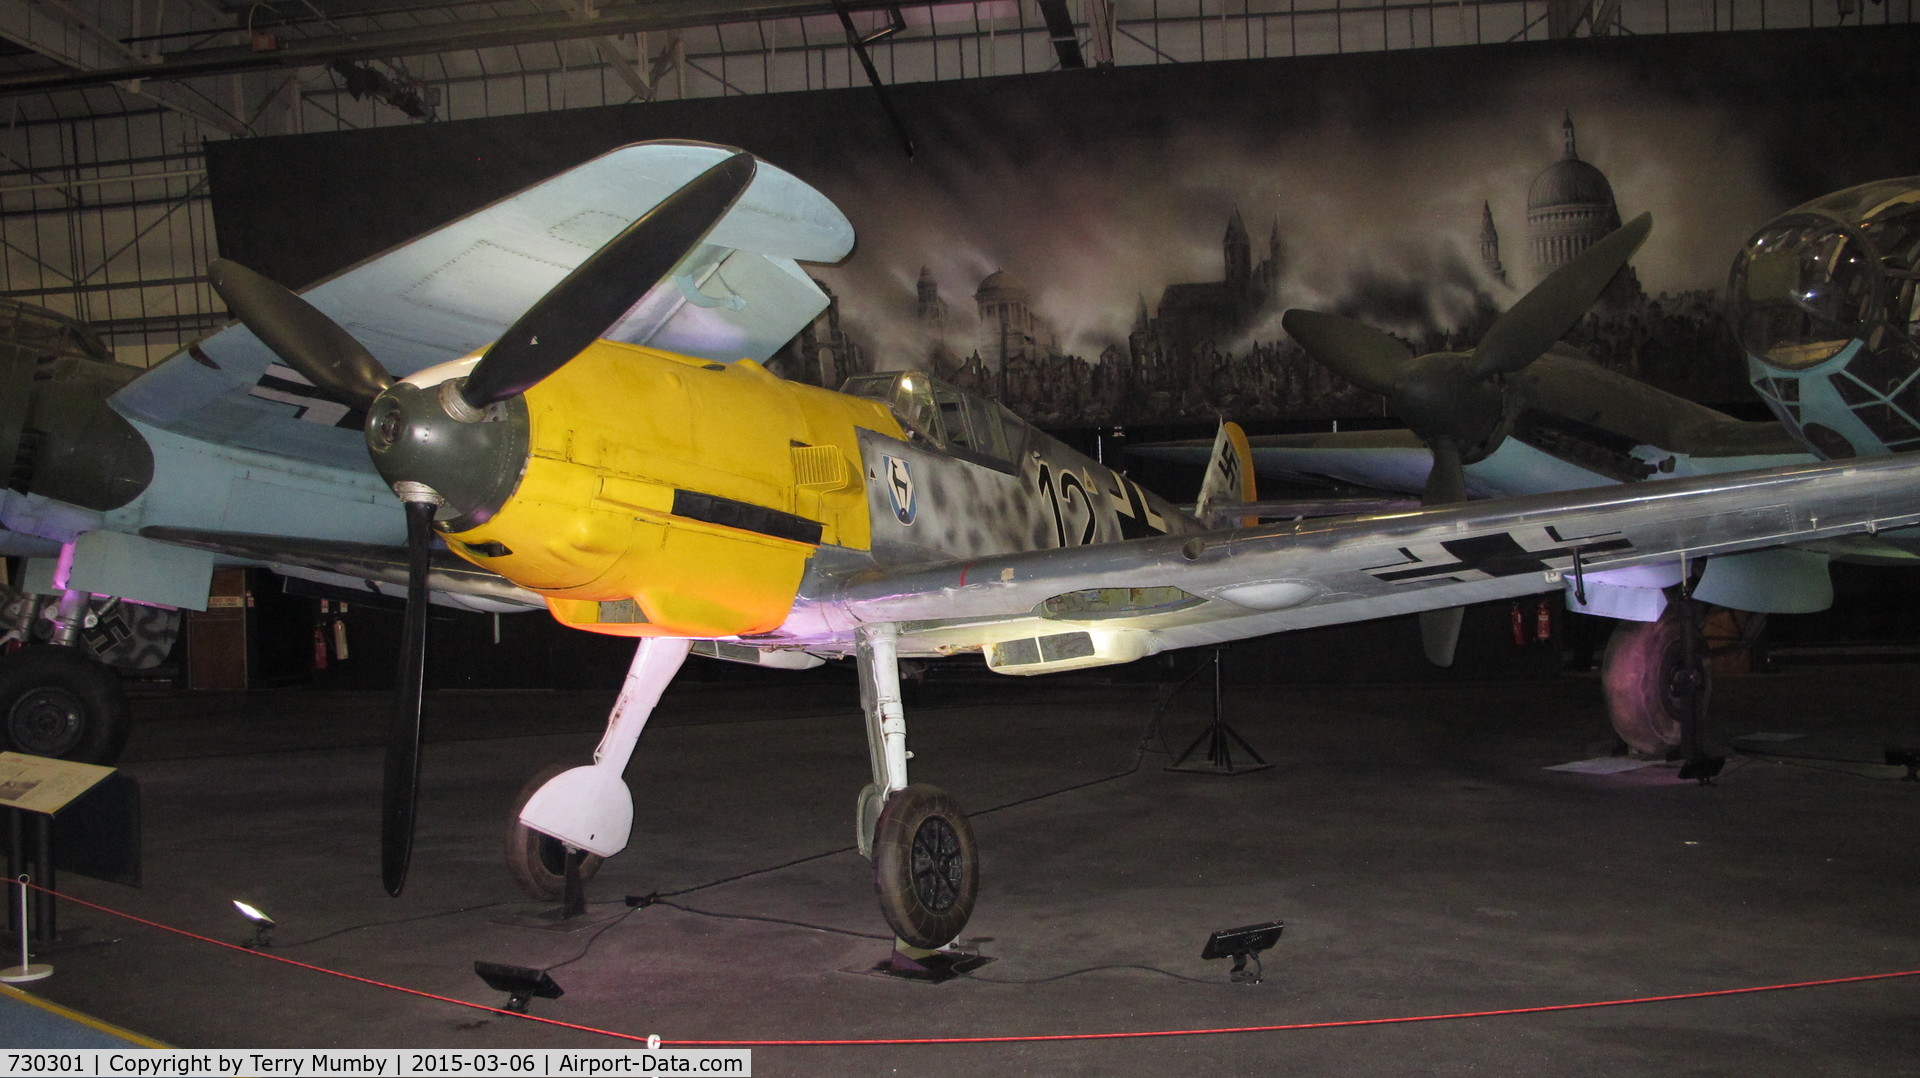 730301, Messerschmitt Bf-110G-4/R6 C/N 730301, Took this Photograph on a visit to Hendon Air Museum on 6th March 2015